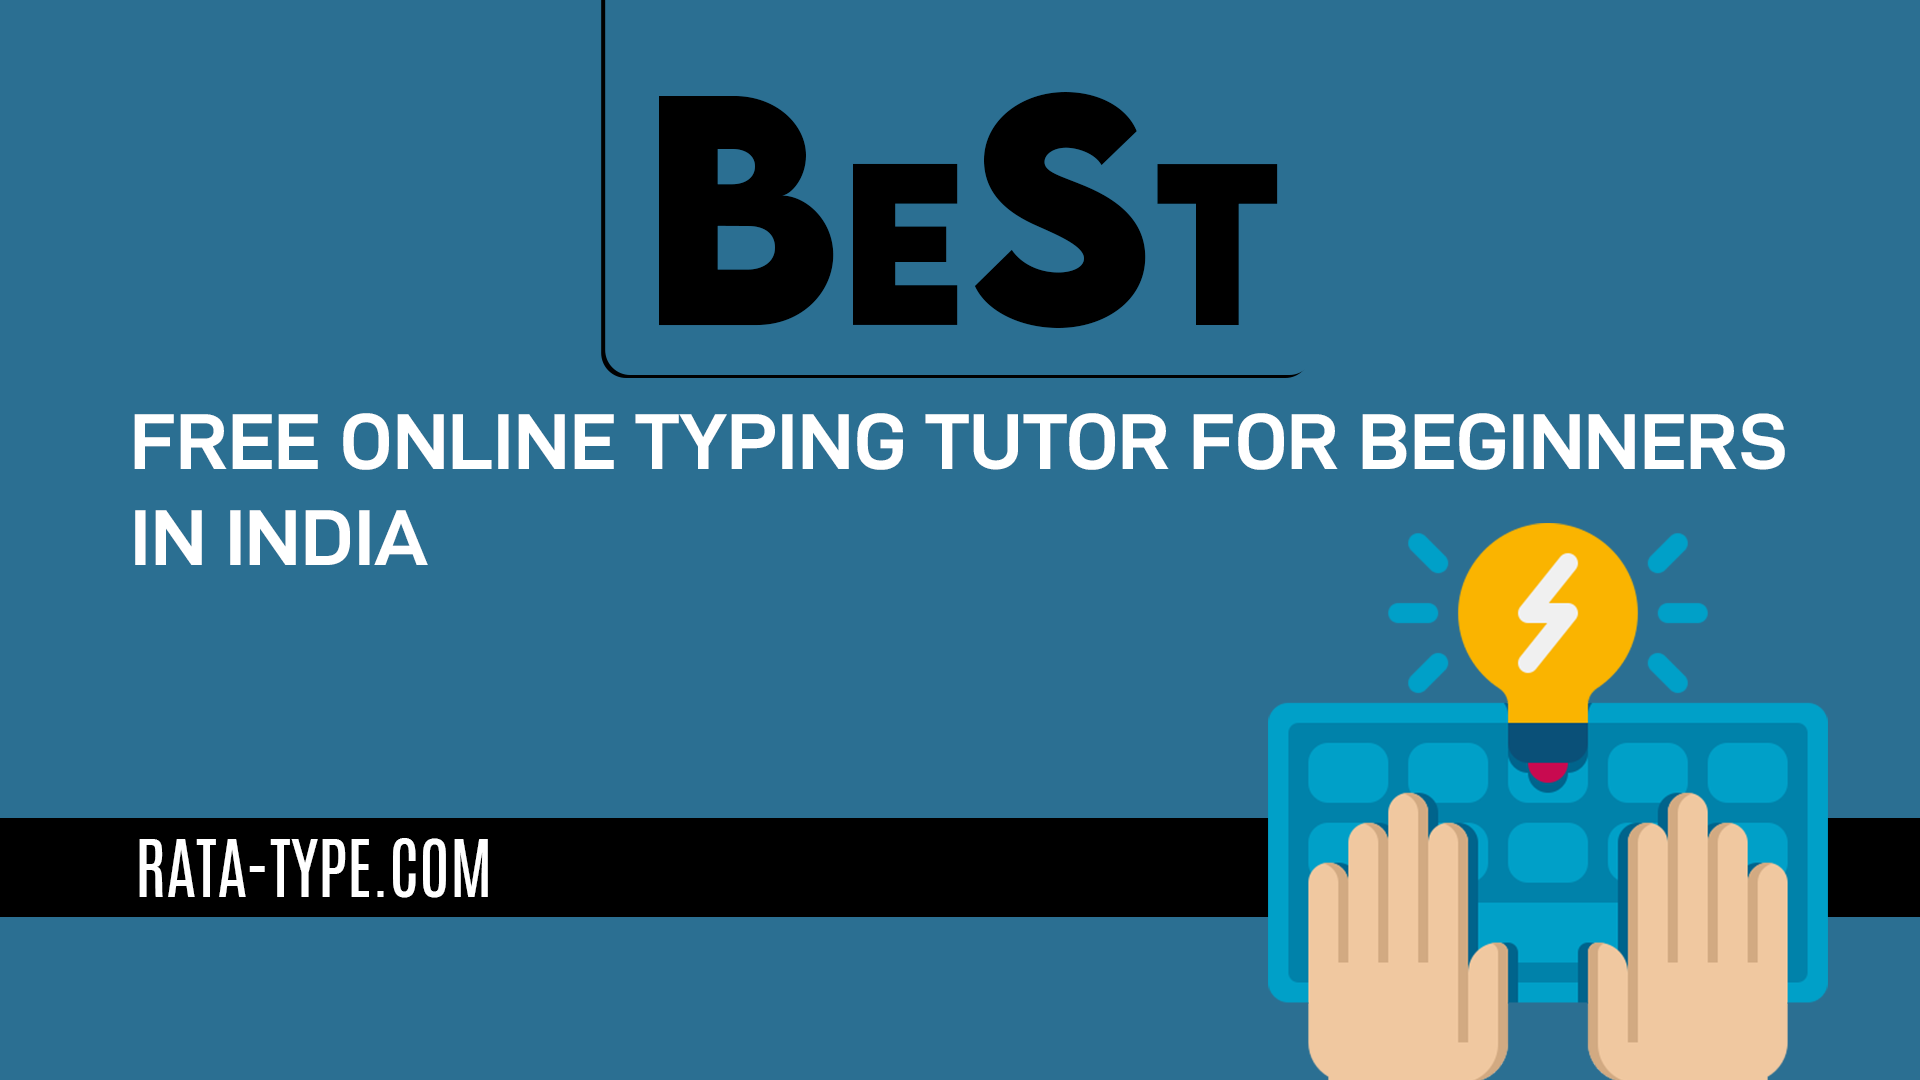 Best Free Online Typing Tutor for Beginners in India